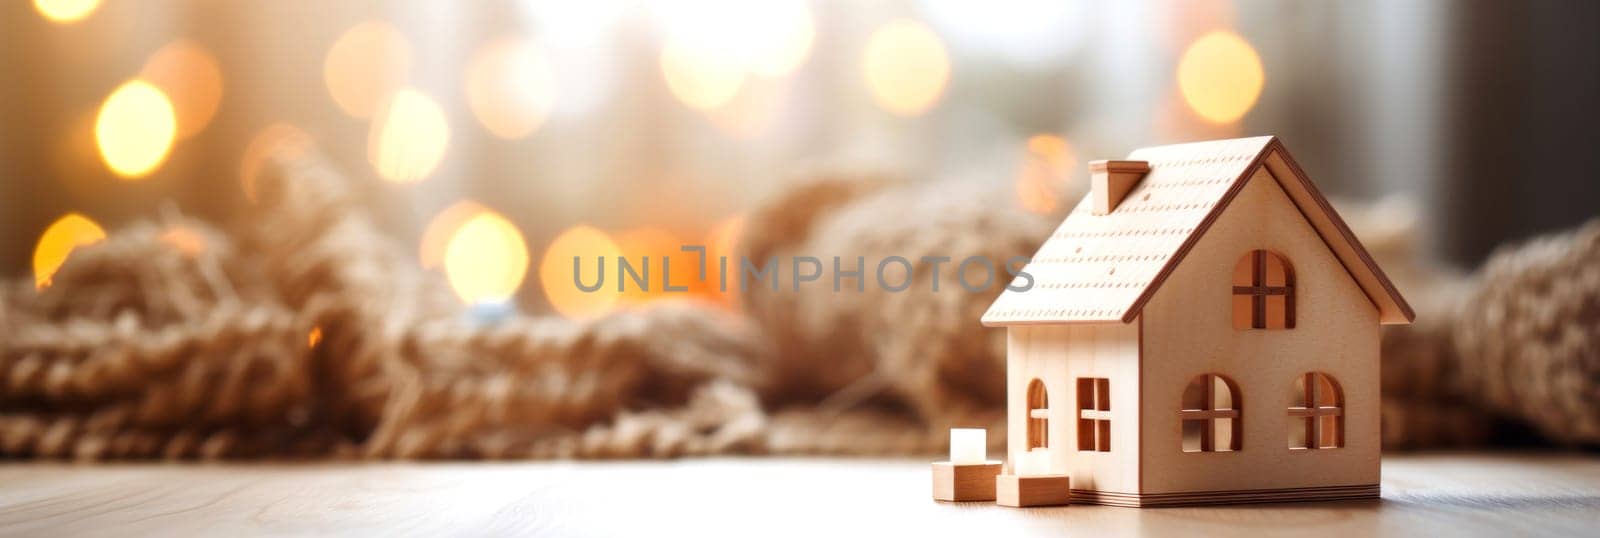 Miniature wooden house with a warm, blurry light background with copy space